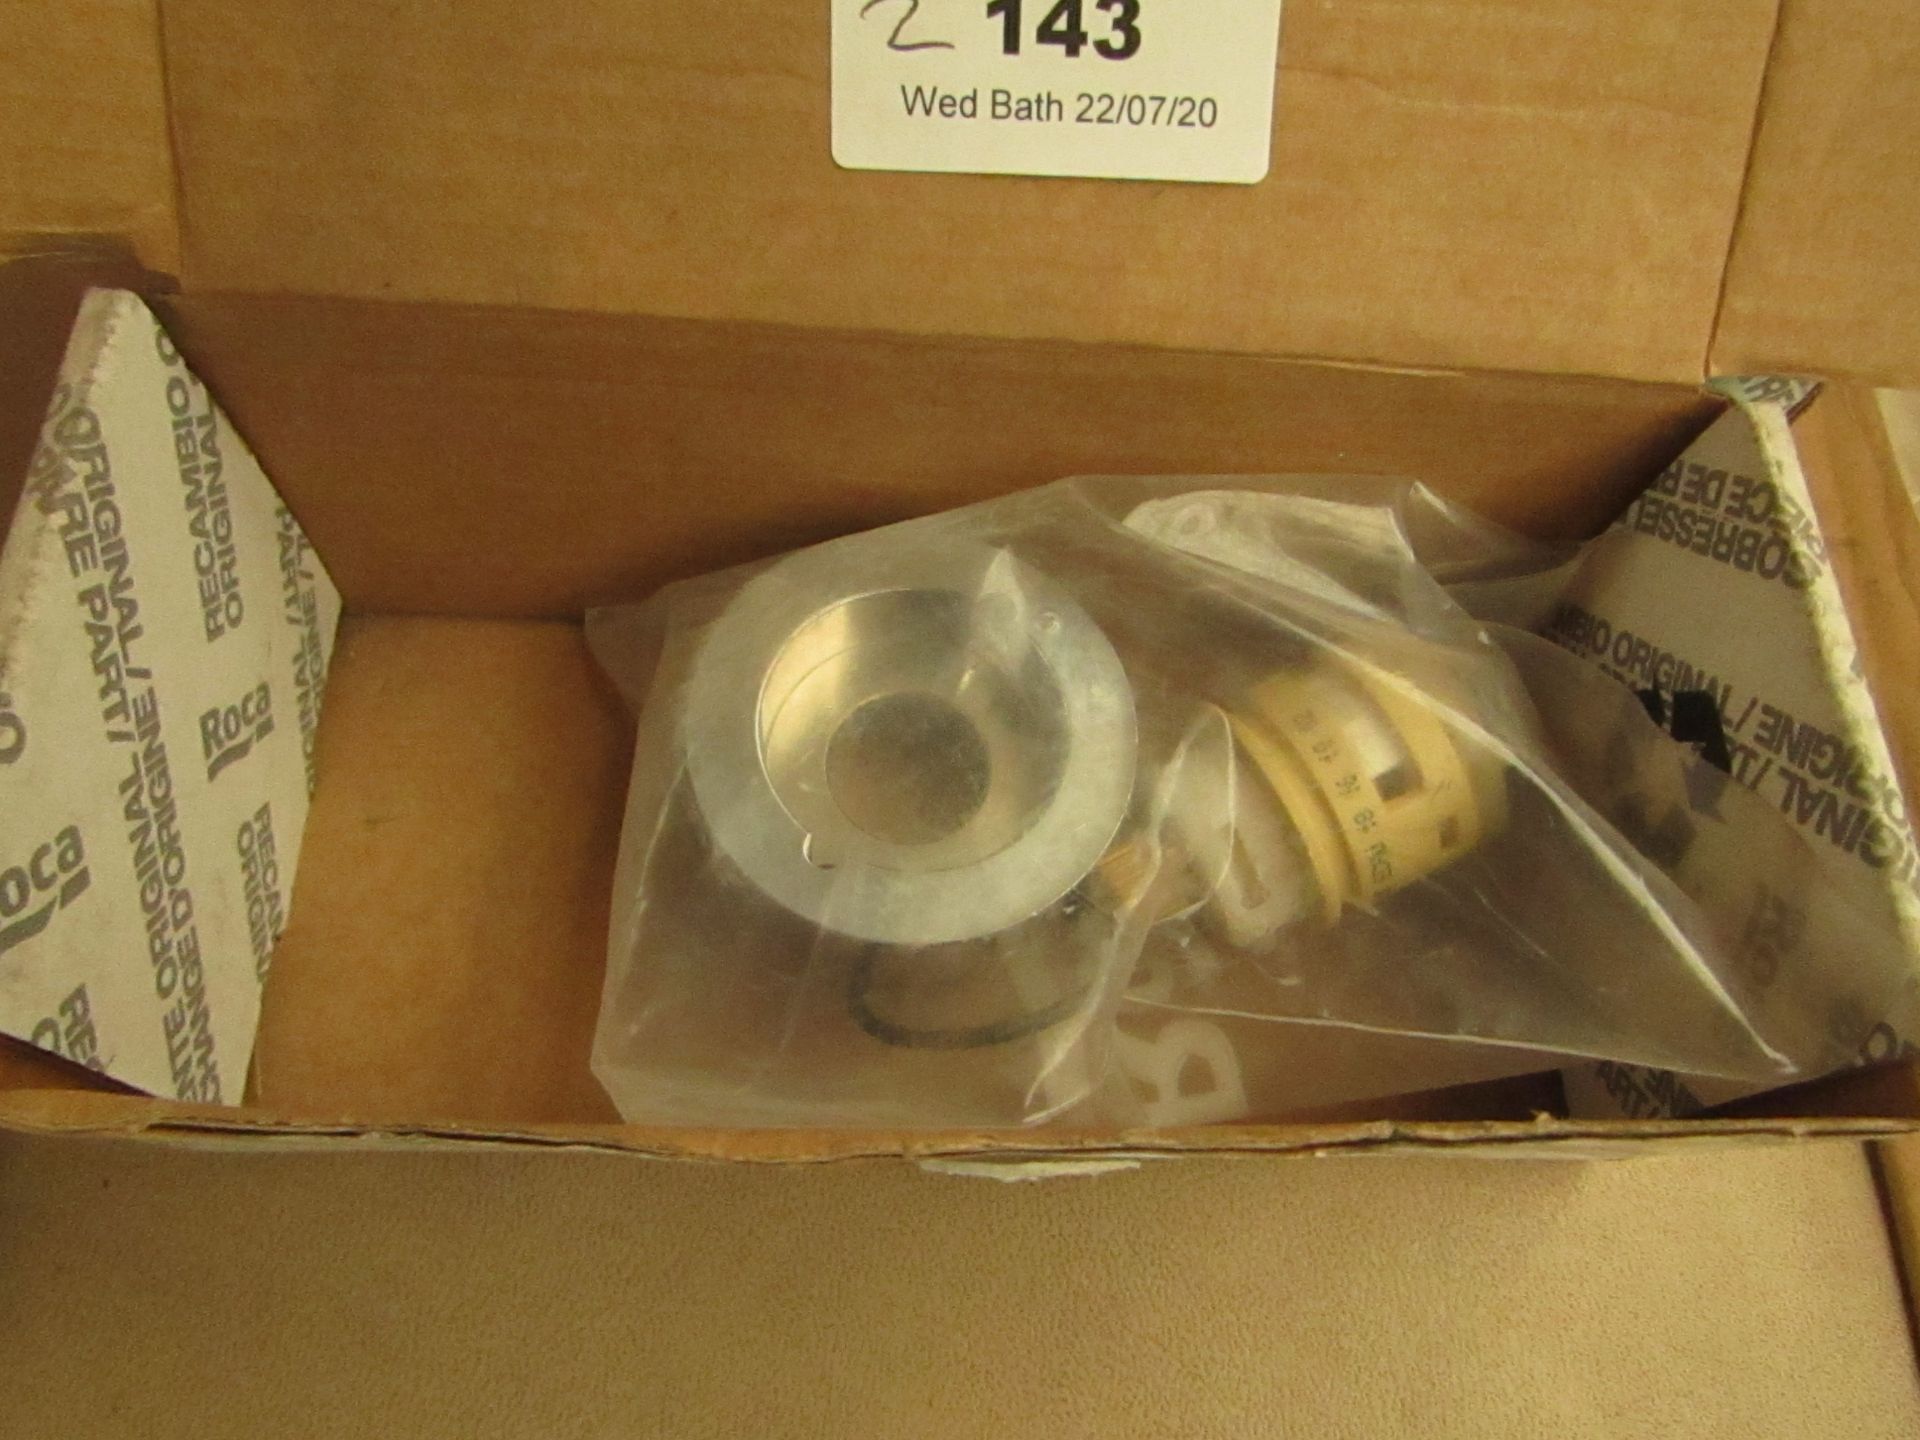 2x Roca - Thesis Block thermostat - New Packaged & Boxed.